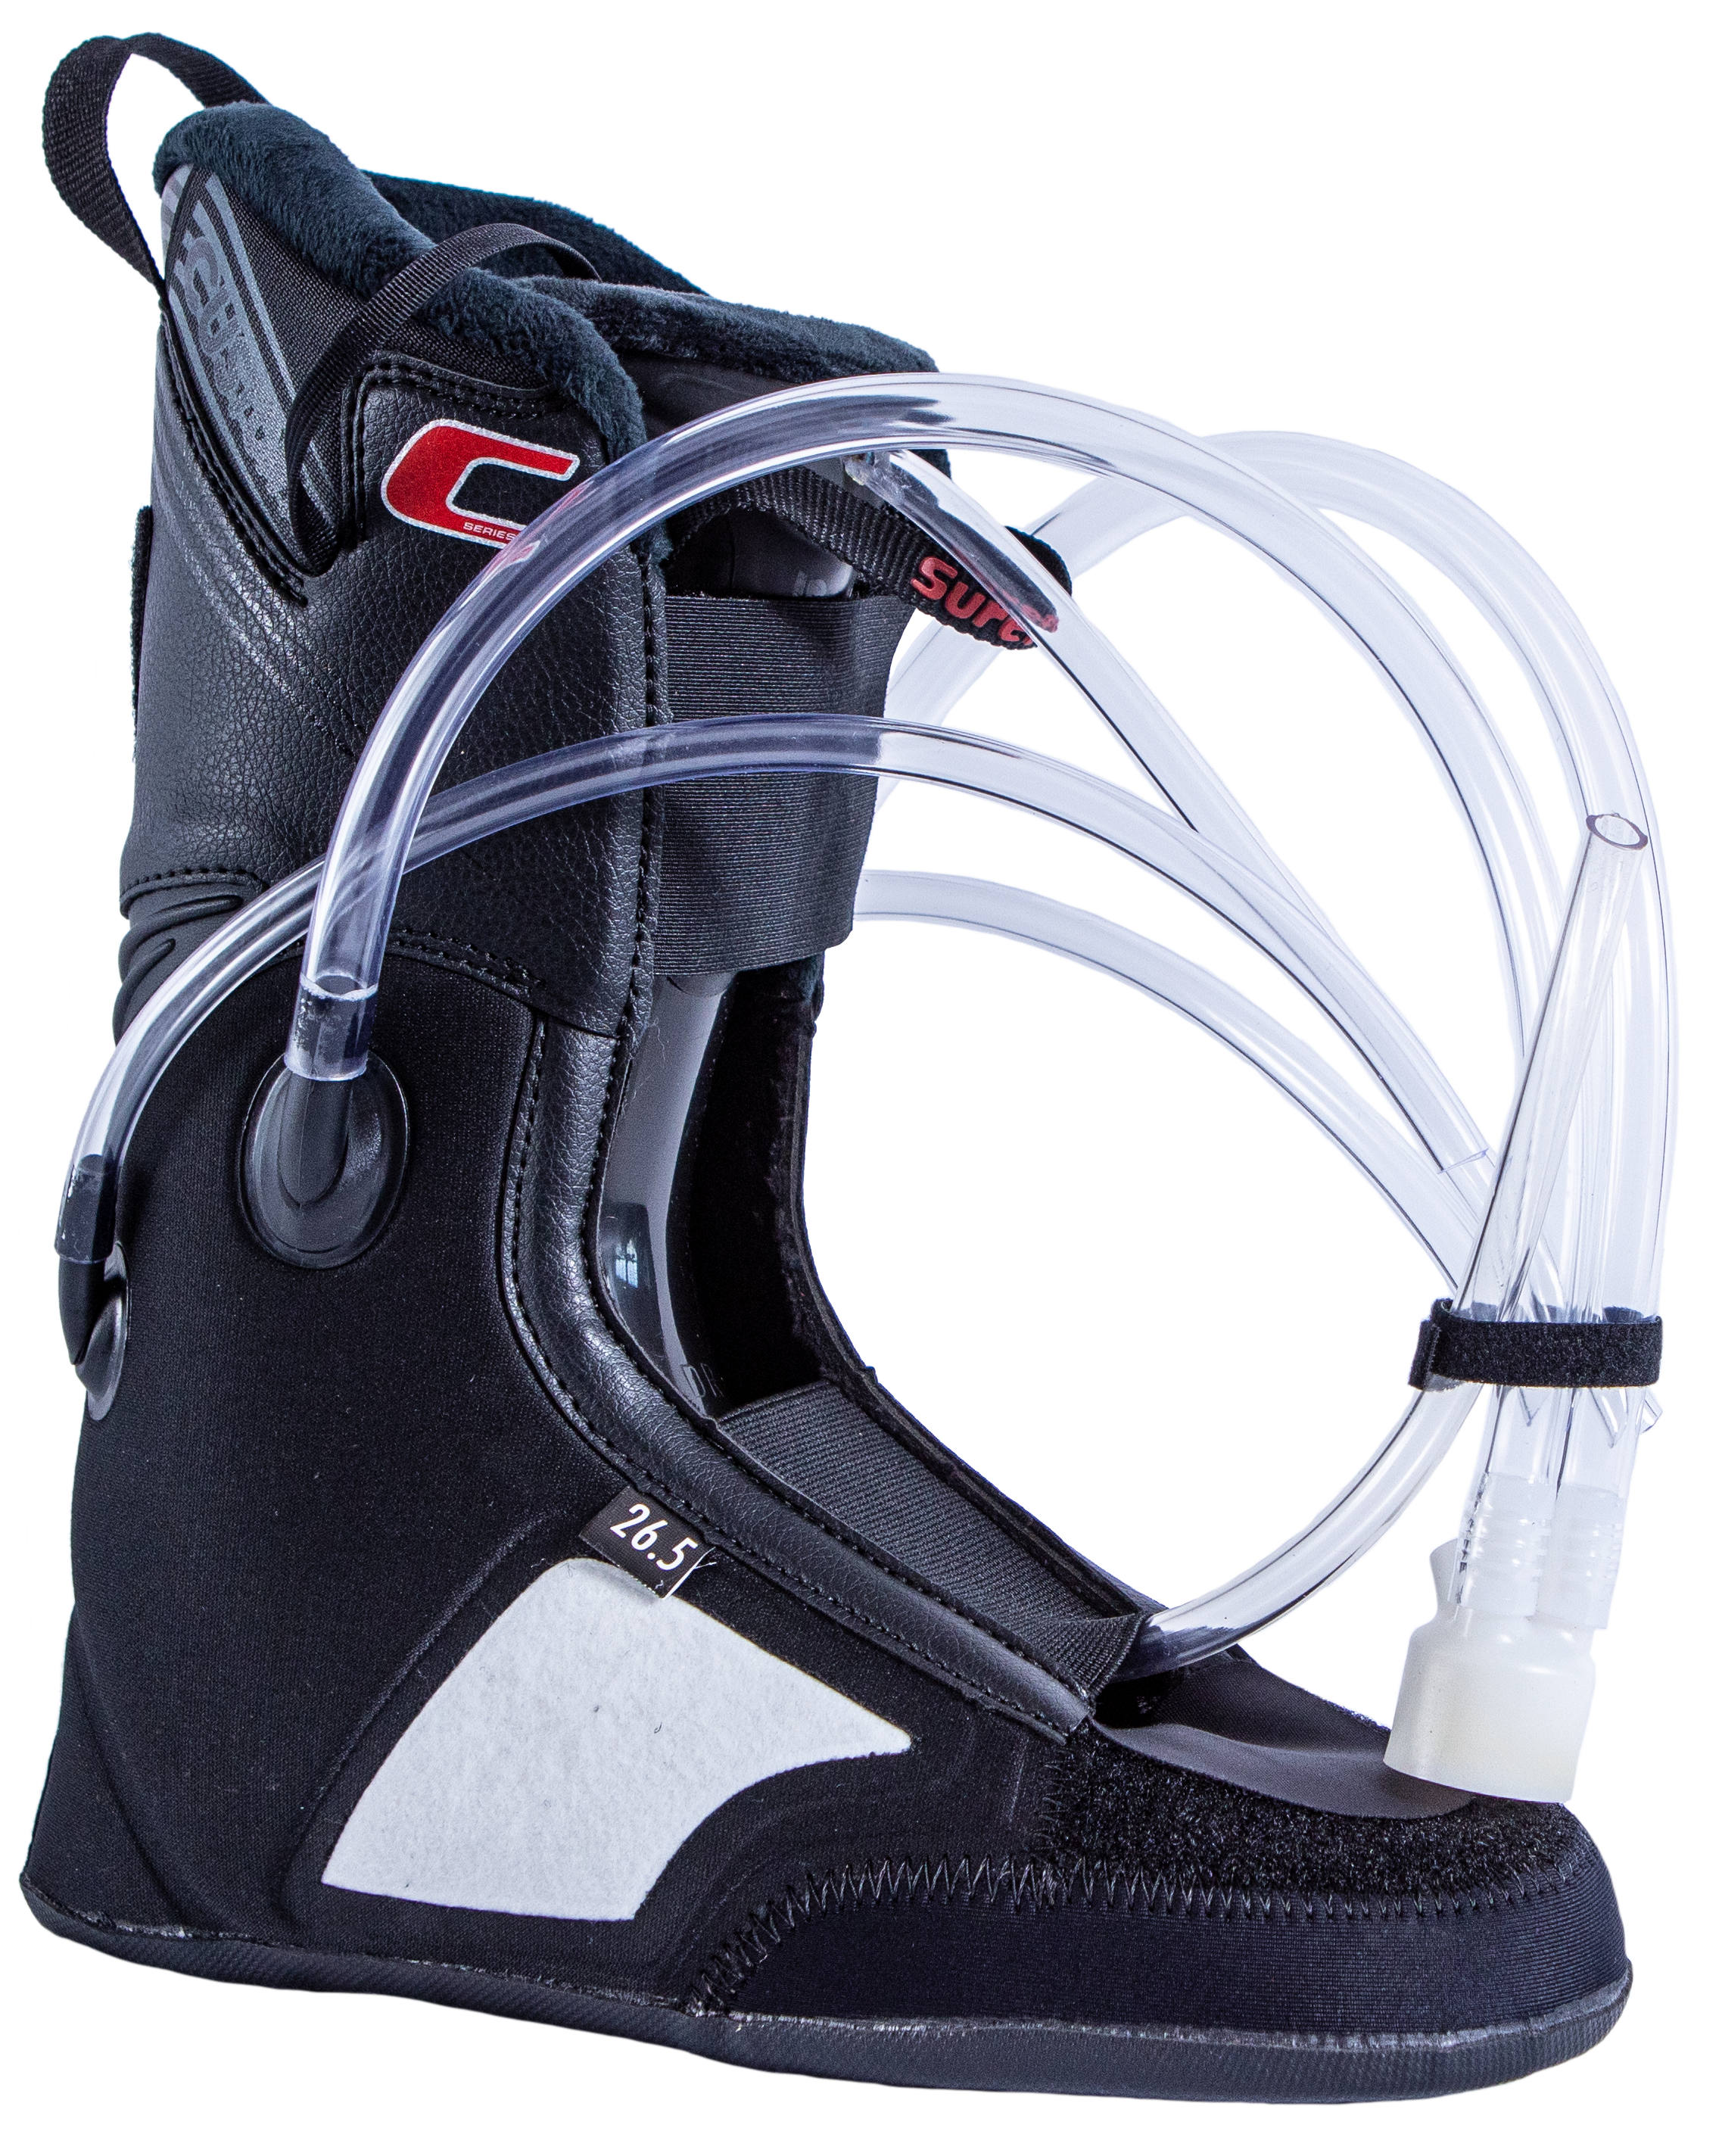 Surefoot Contoura C Heat Custom Foam Injected Ski Boot Liner. Black liner with red 'C' and plastic tubes coming out of the sides and tongue for memory foam injection. Heater battery cord for battery connection on the outside edge.